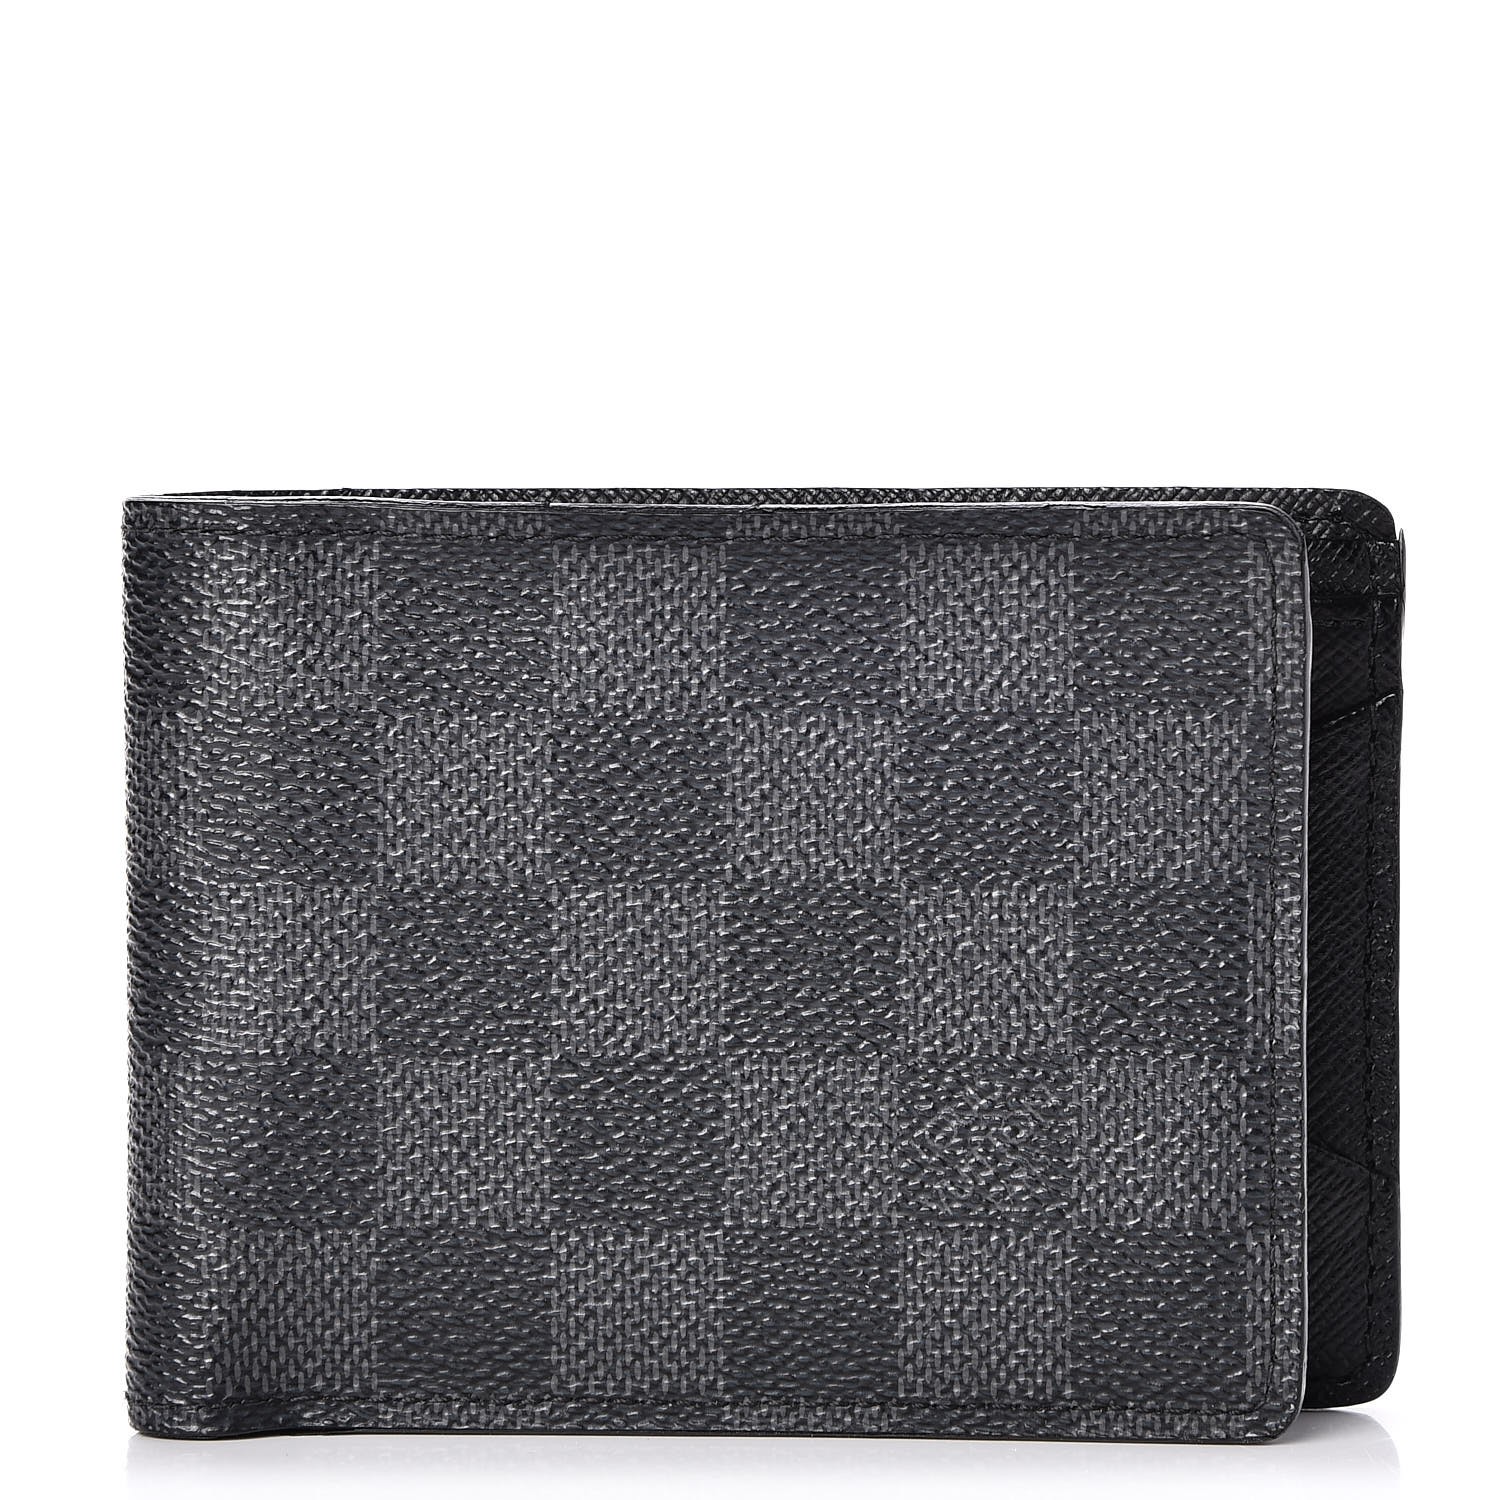 Pre-owned Louis Vuitton Multiple Wallet Damier Graphite Black/red